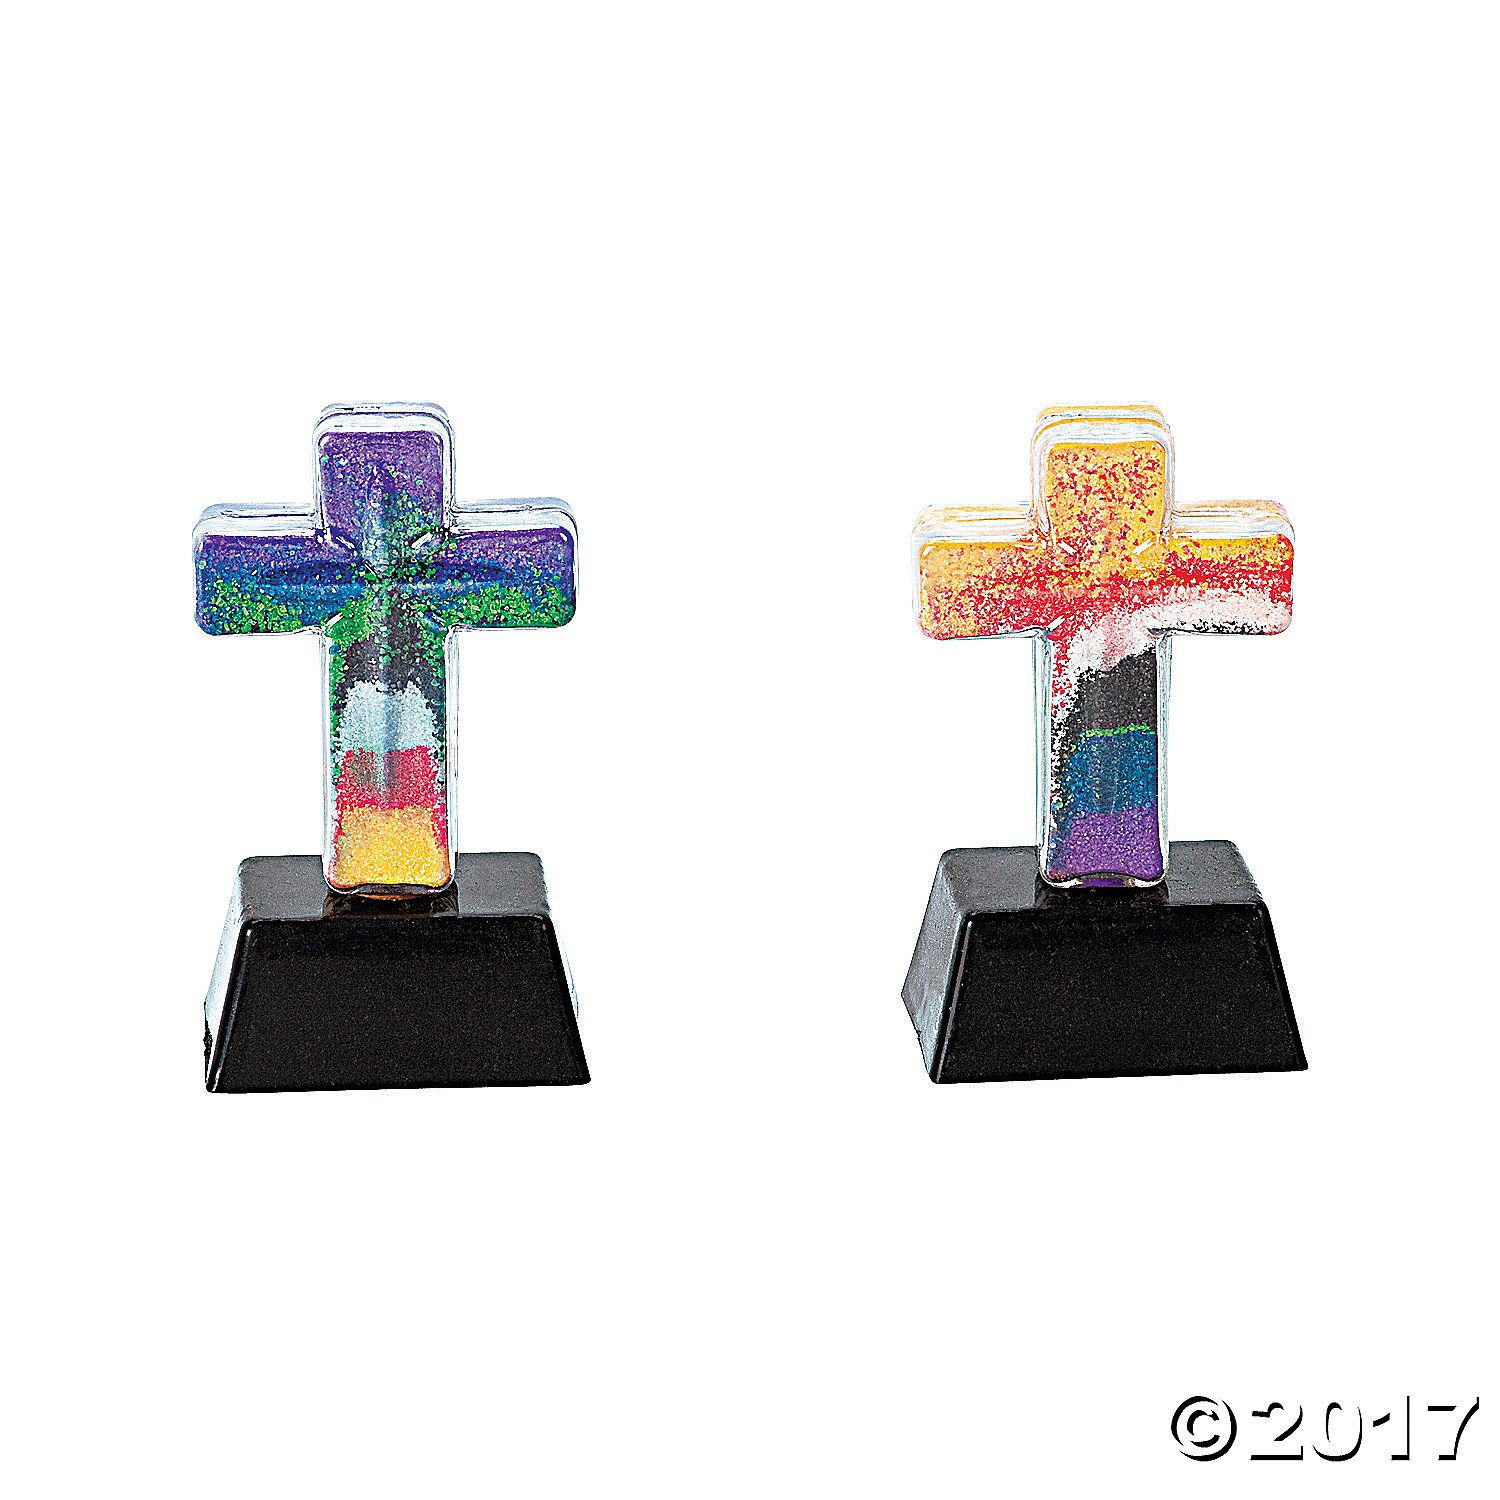 Bible Crafts For Adults
 Colors of Faith Sand Art 3D Crosses